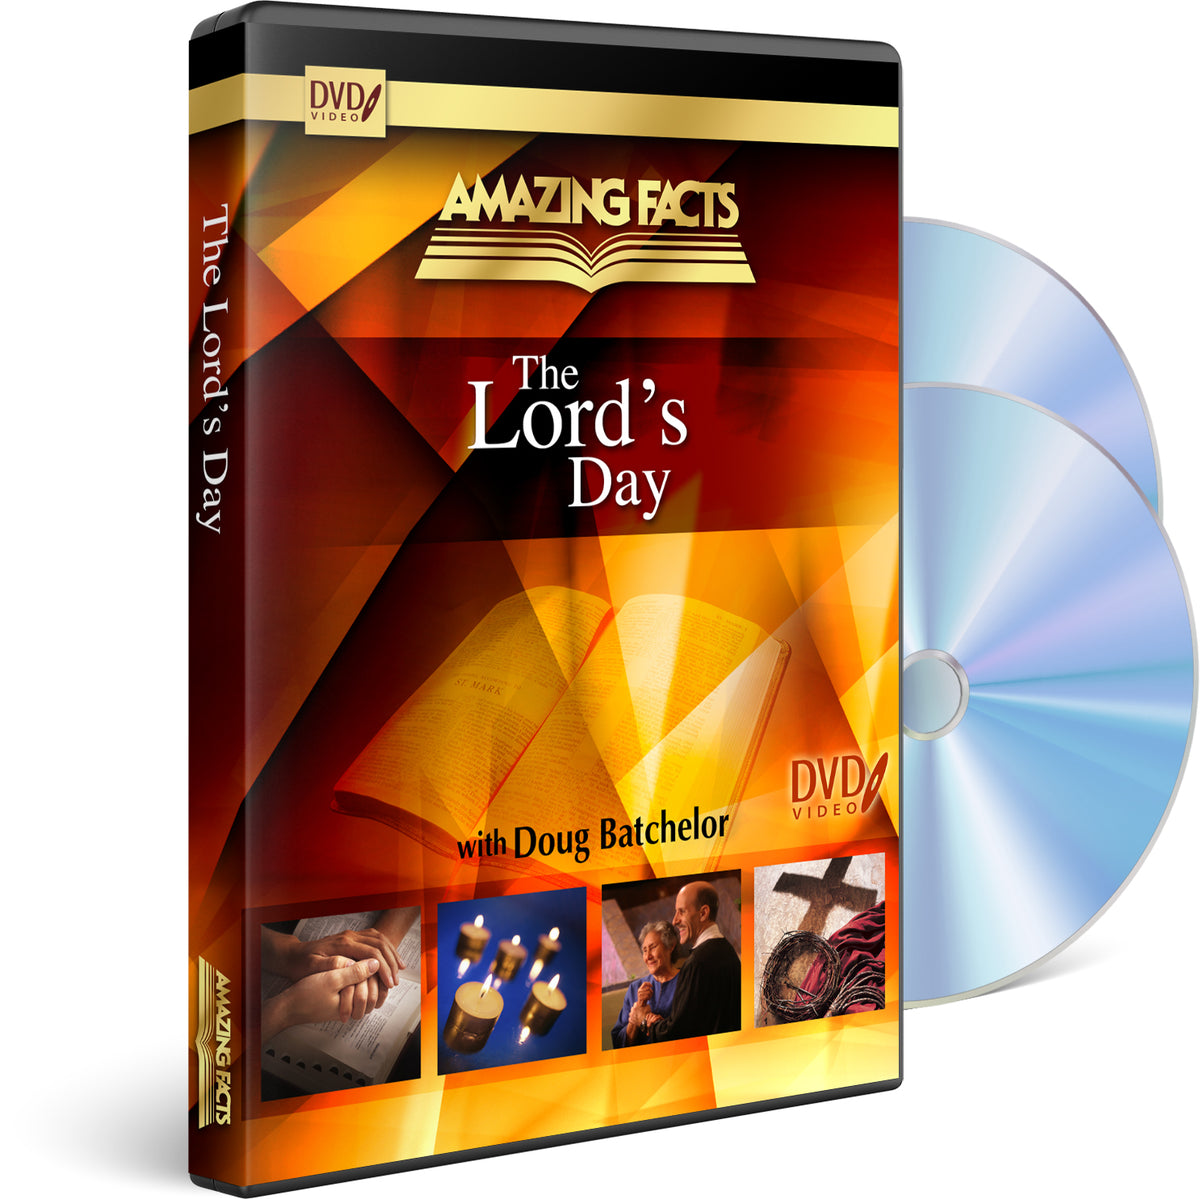 The Lord's Day DVD Set by Doug Batchelor